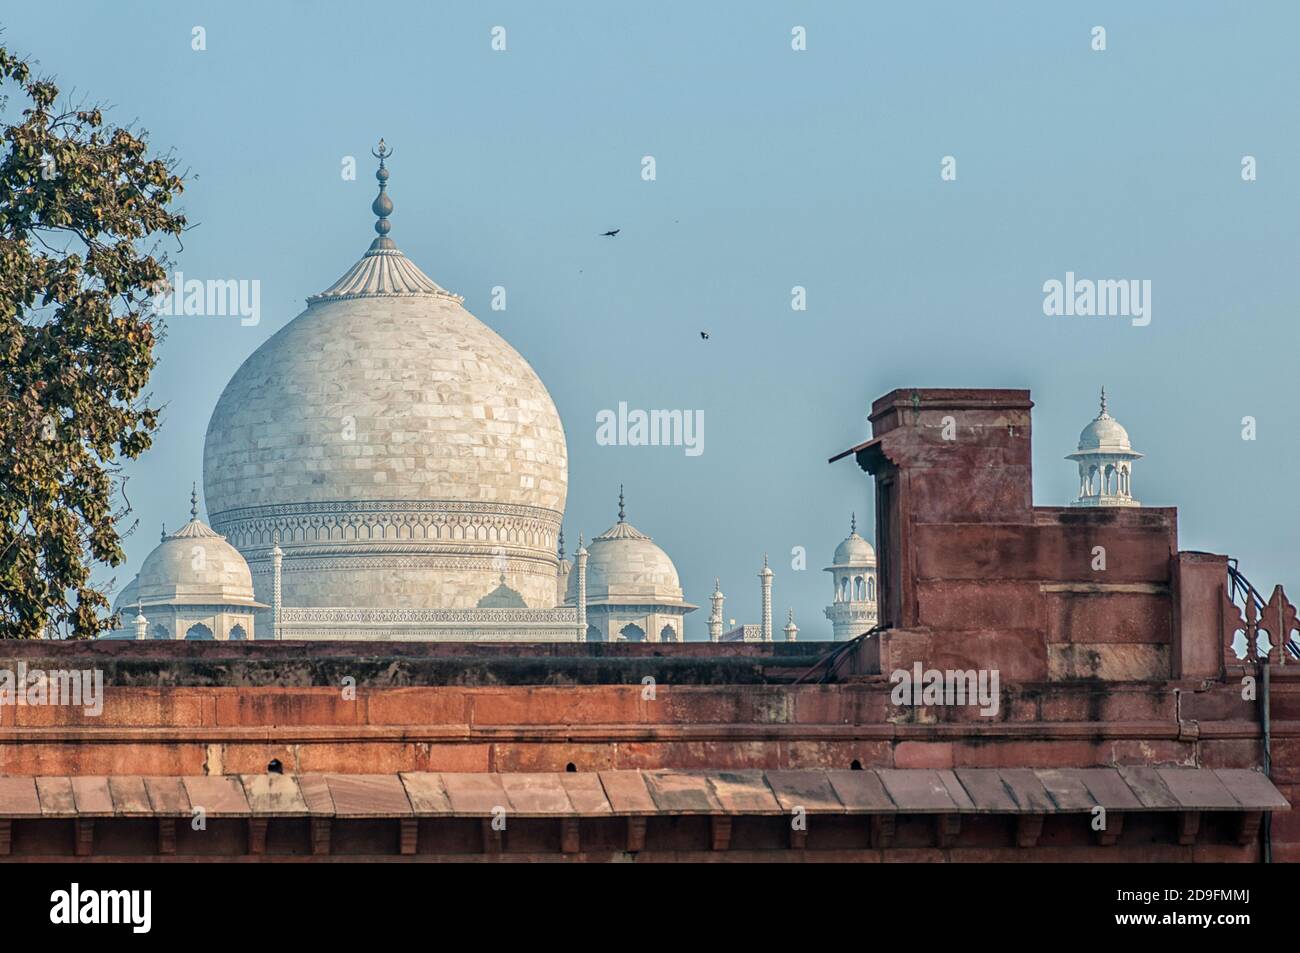 The Taj Mahal is an ivory-white marble mausoleum on the south bank of the Yamuna river in the Indian city of Agra, Uttar Pradesh. Stock Photo